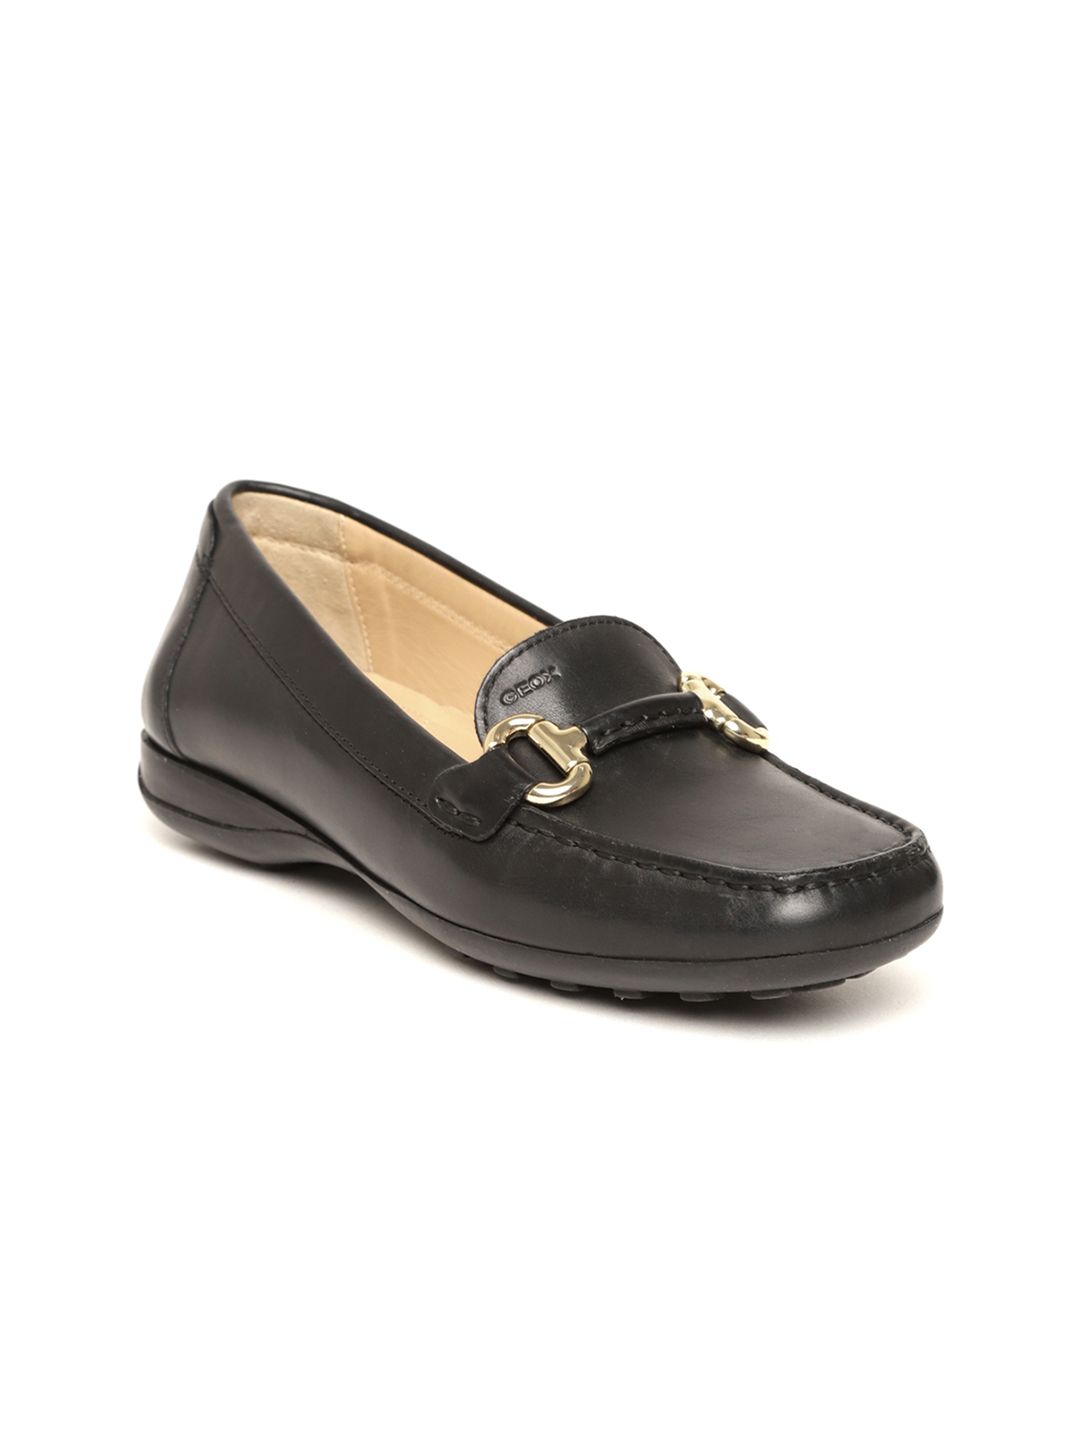 Geox Women Black Solid Leather Loafers Price in India